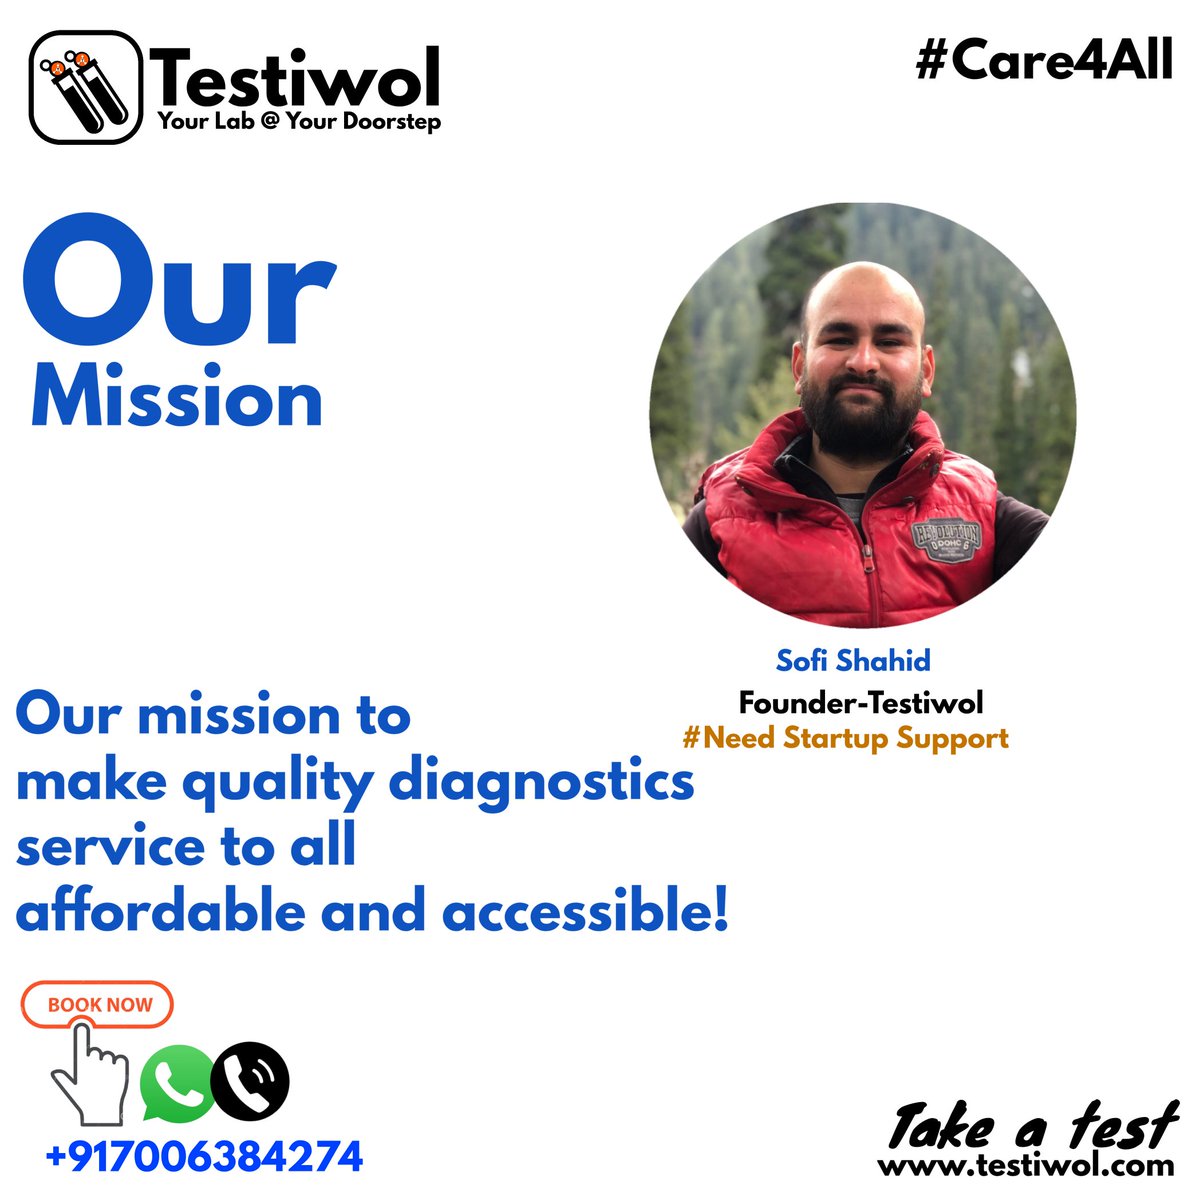 Our mission to  make quality diagnostics service to all
affordable and accessible!

Need Your Startup Support
Testiwol India Private Limited
#mission #vision #testiwol #reels #Health #india #care4all #healthylifestyle #Healthykashmir #ramadan #diagnostics #diagnosticservices